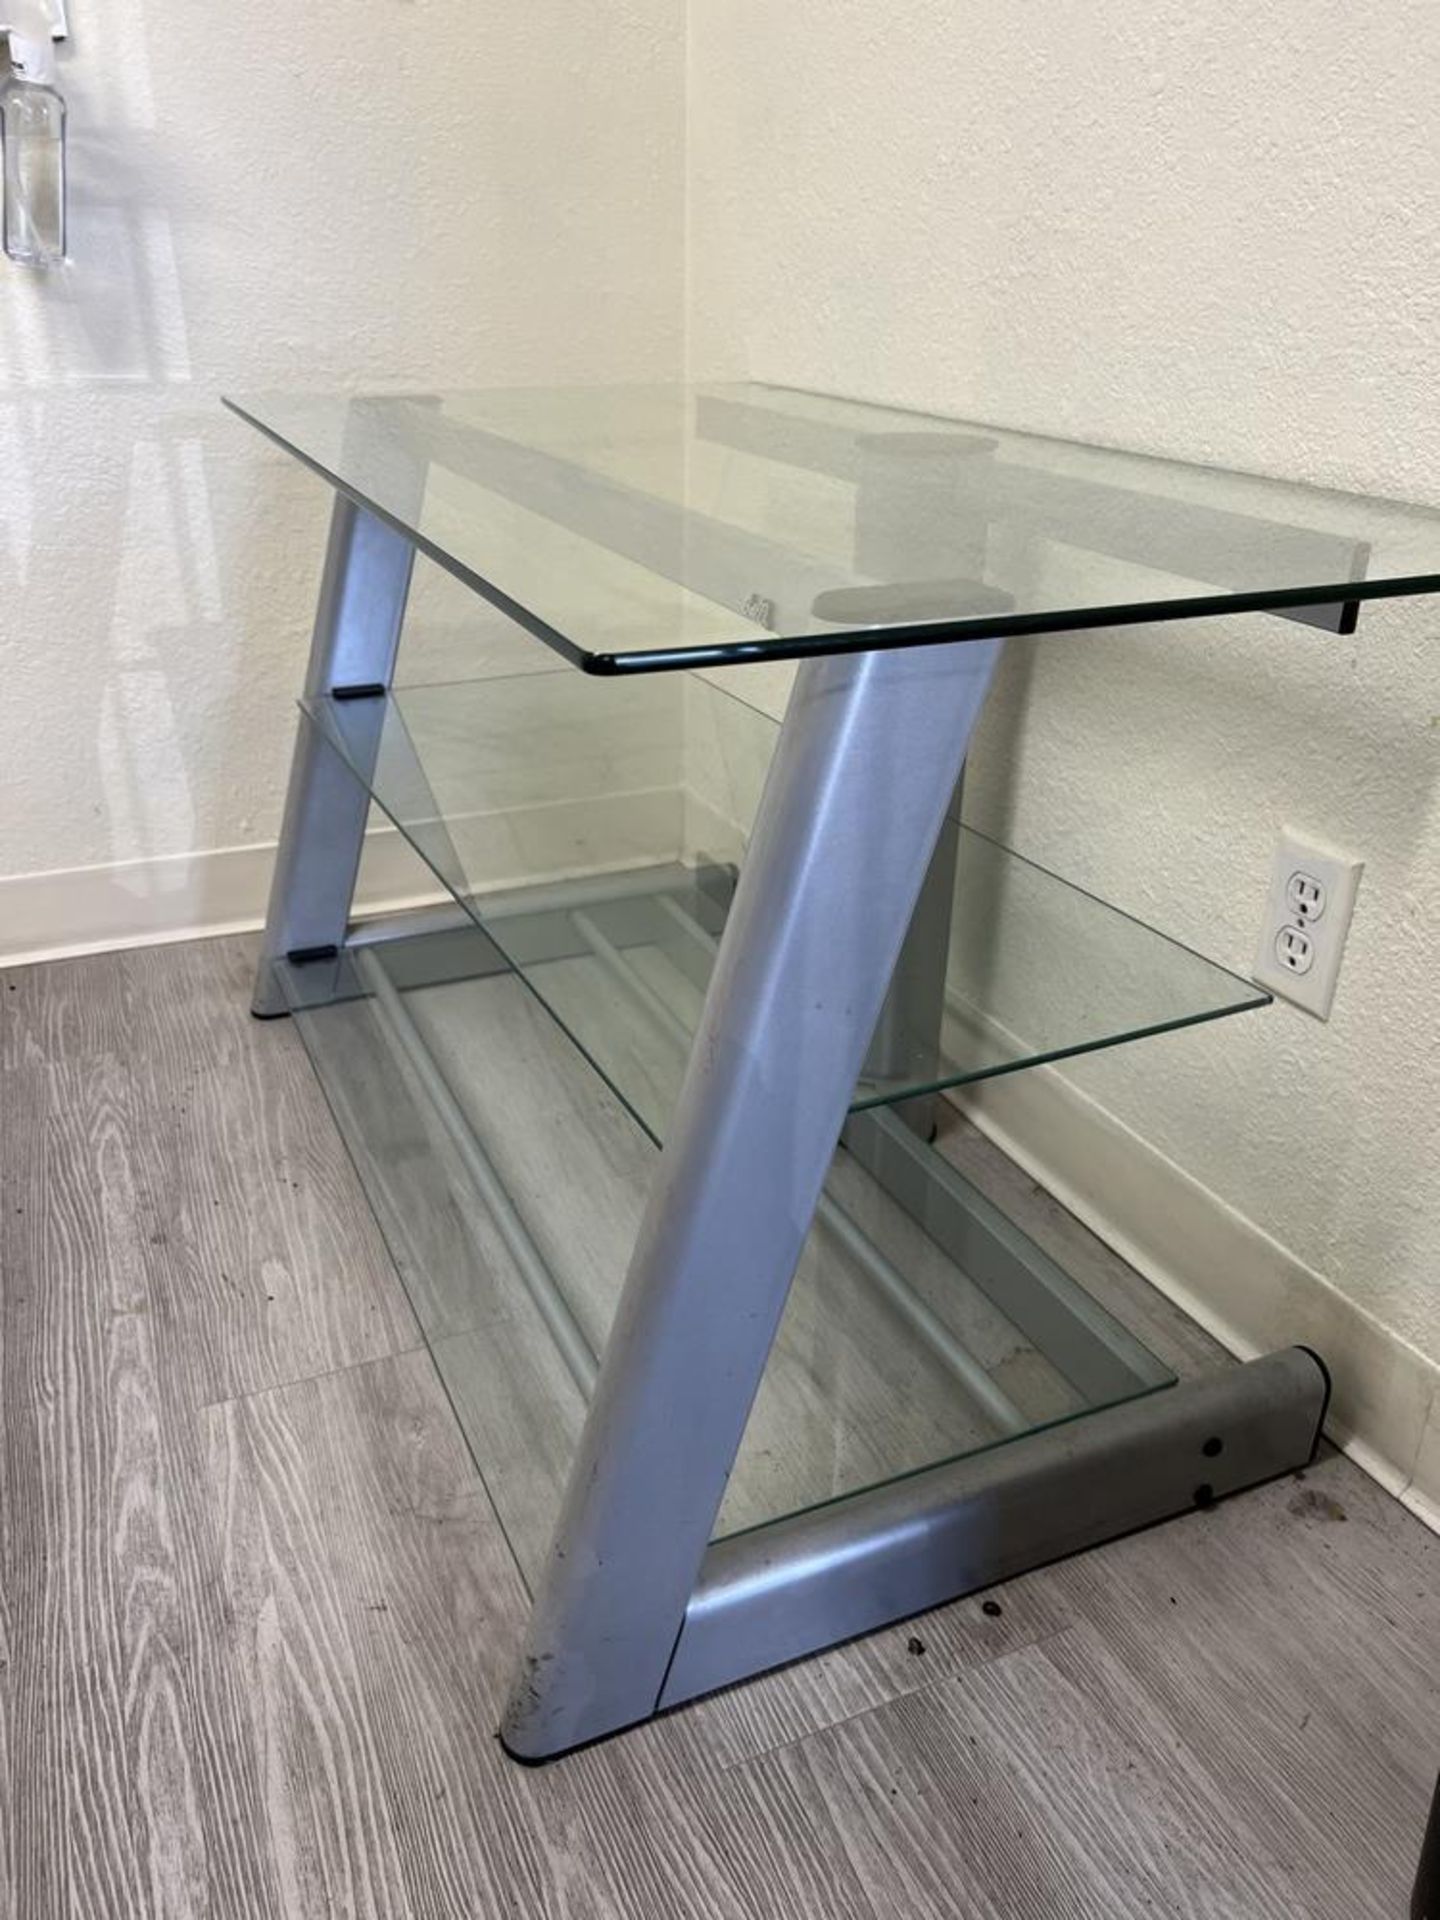 3 Tier Glass Entertainment Center 41" x 21" x 24" - Image 3 of 3